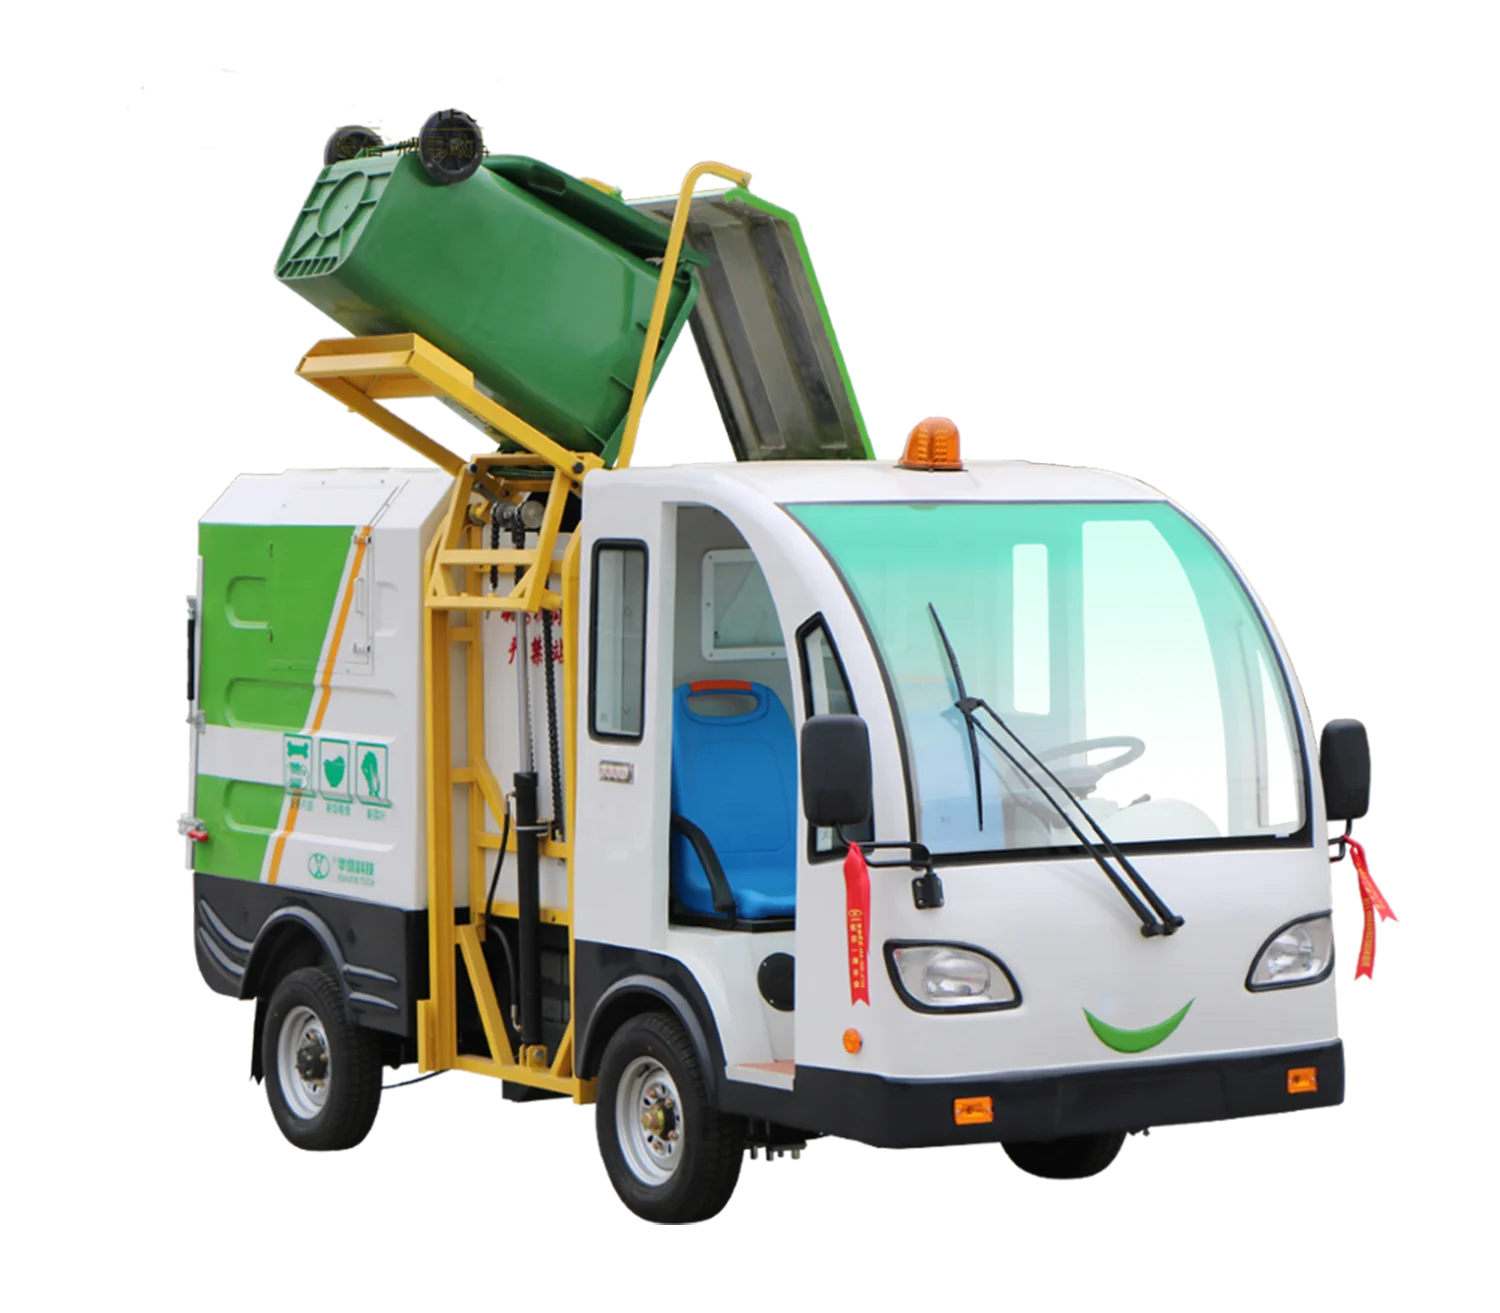 Urban Electric Sealed Bin Lifter Garbage Collection Transfer Compactor Vehicle Truck Price (1600448985222)